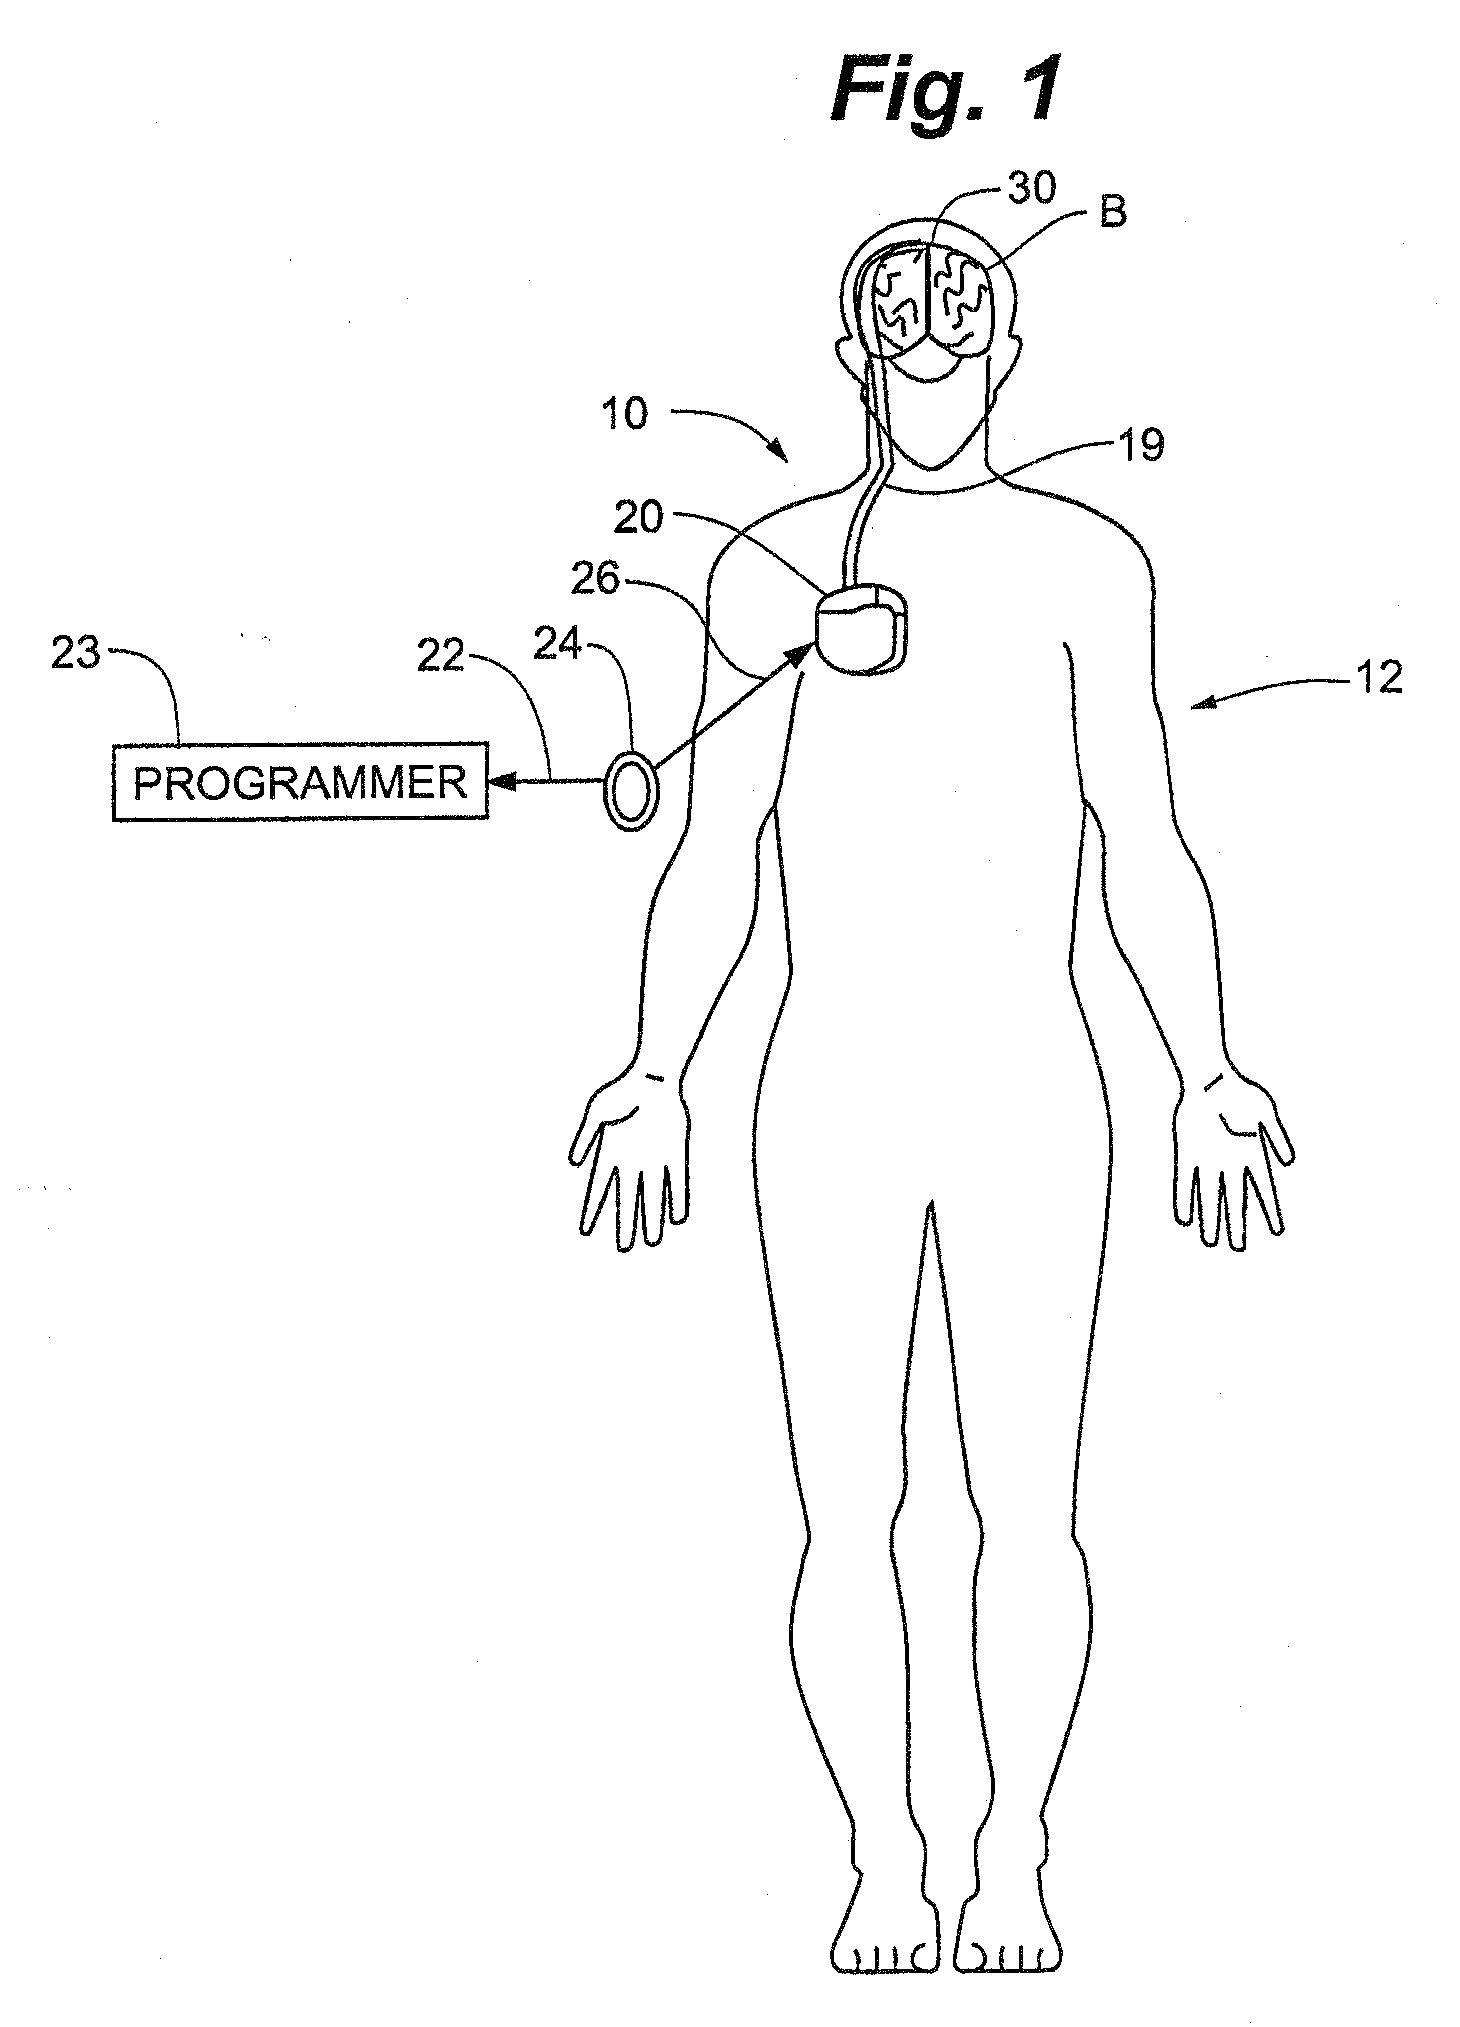 Method and Apparatus for the Treatment of Movement Disorders